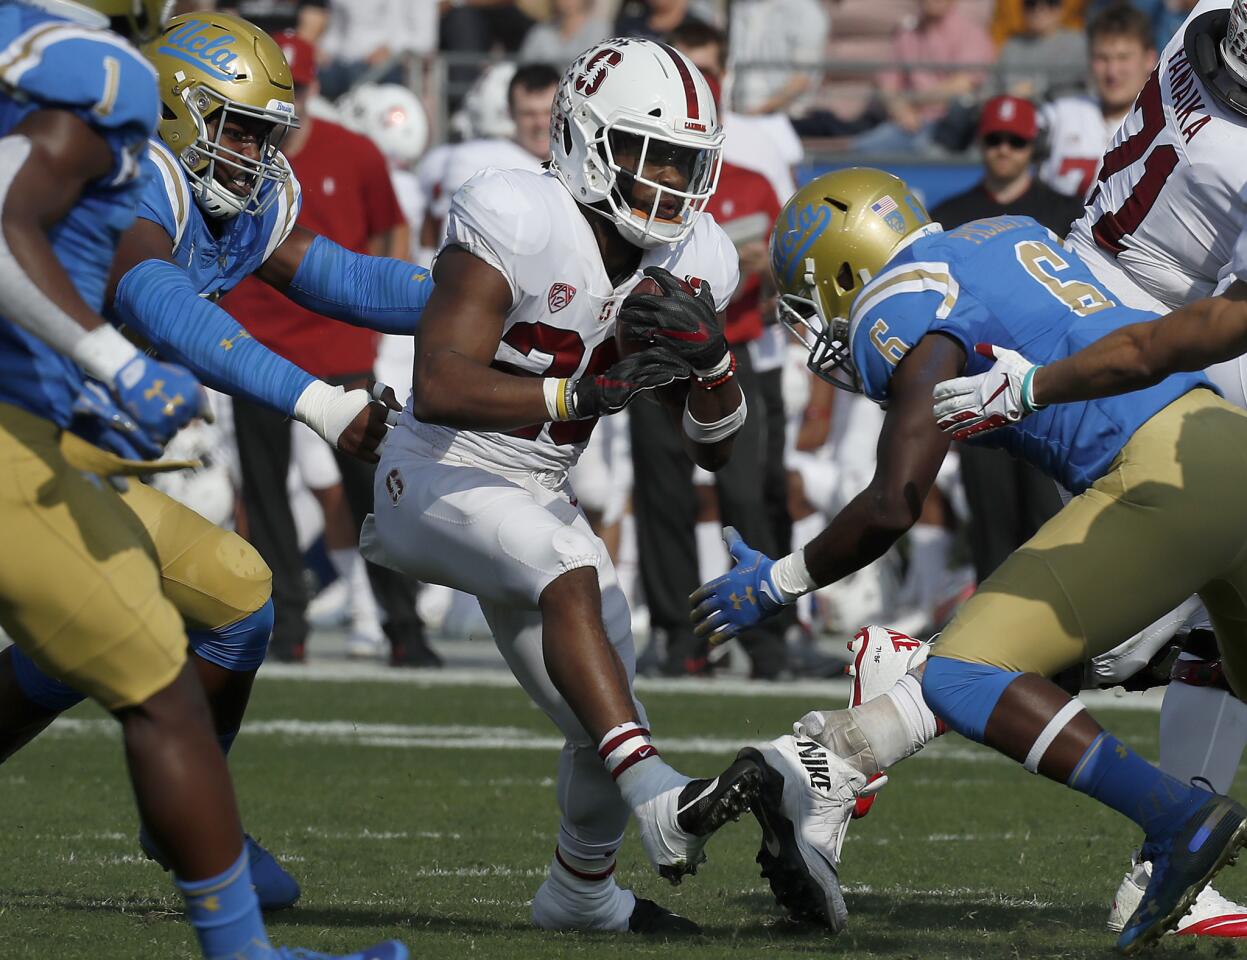 Stanford running back Bryce Love tries to make his way through the Bruins defense during the first quarter.